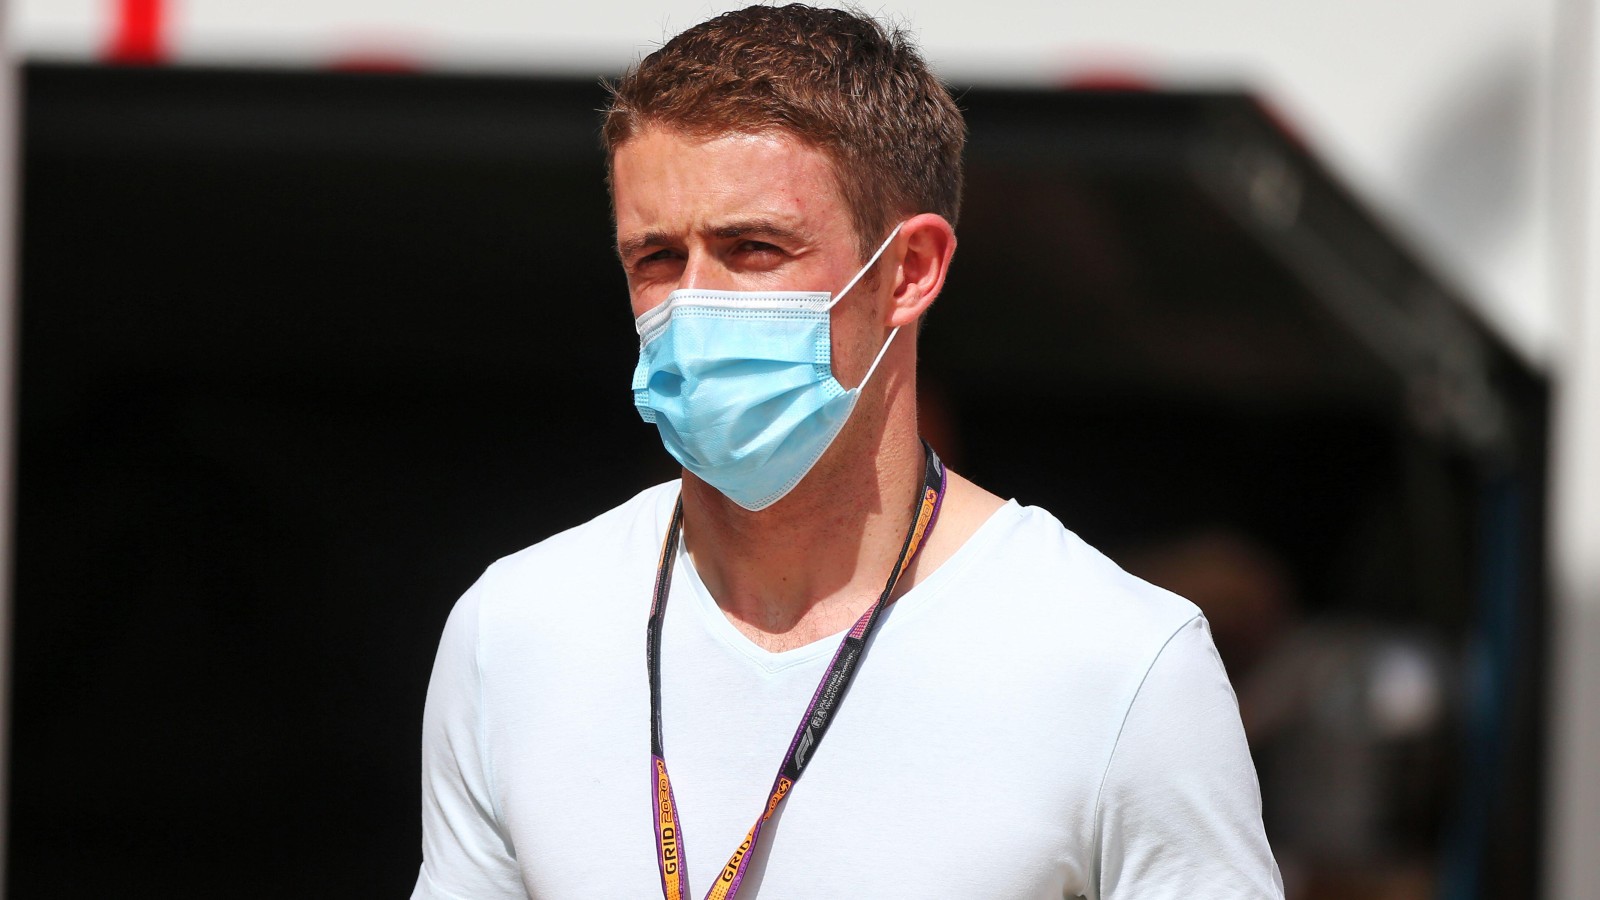 Paul di Resta pictured in the Silverstone paddock. England, August 2020.